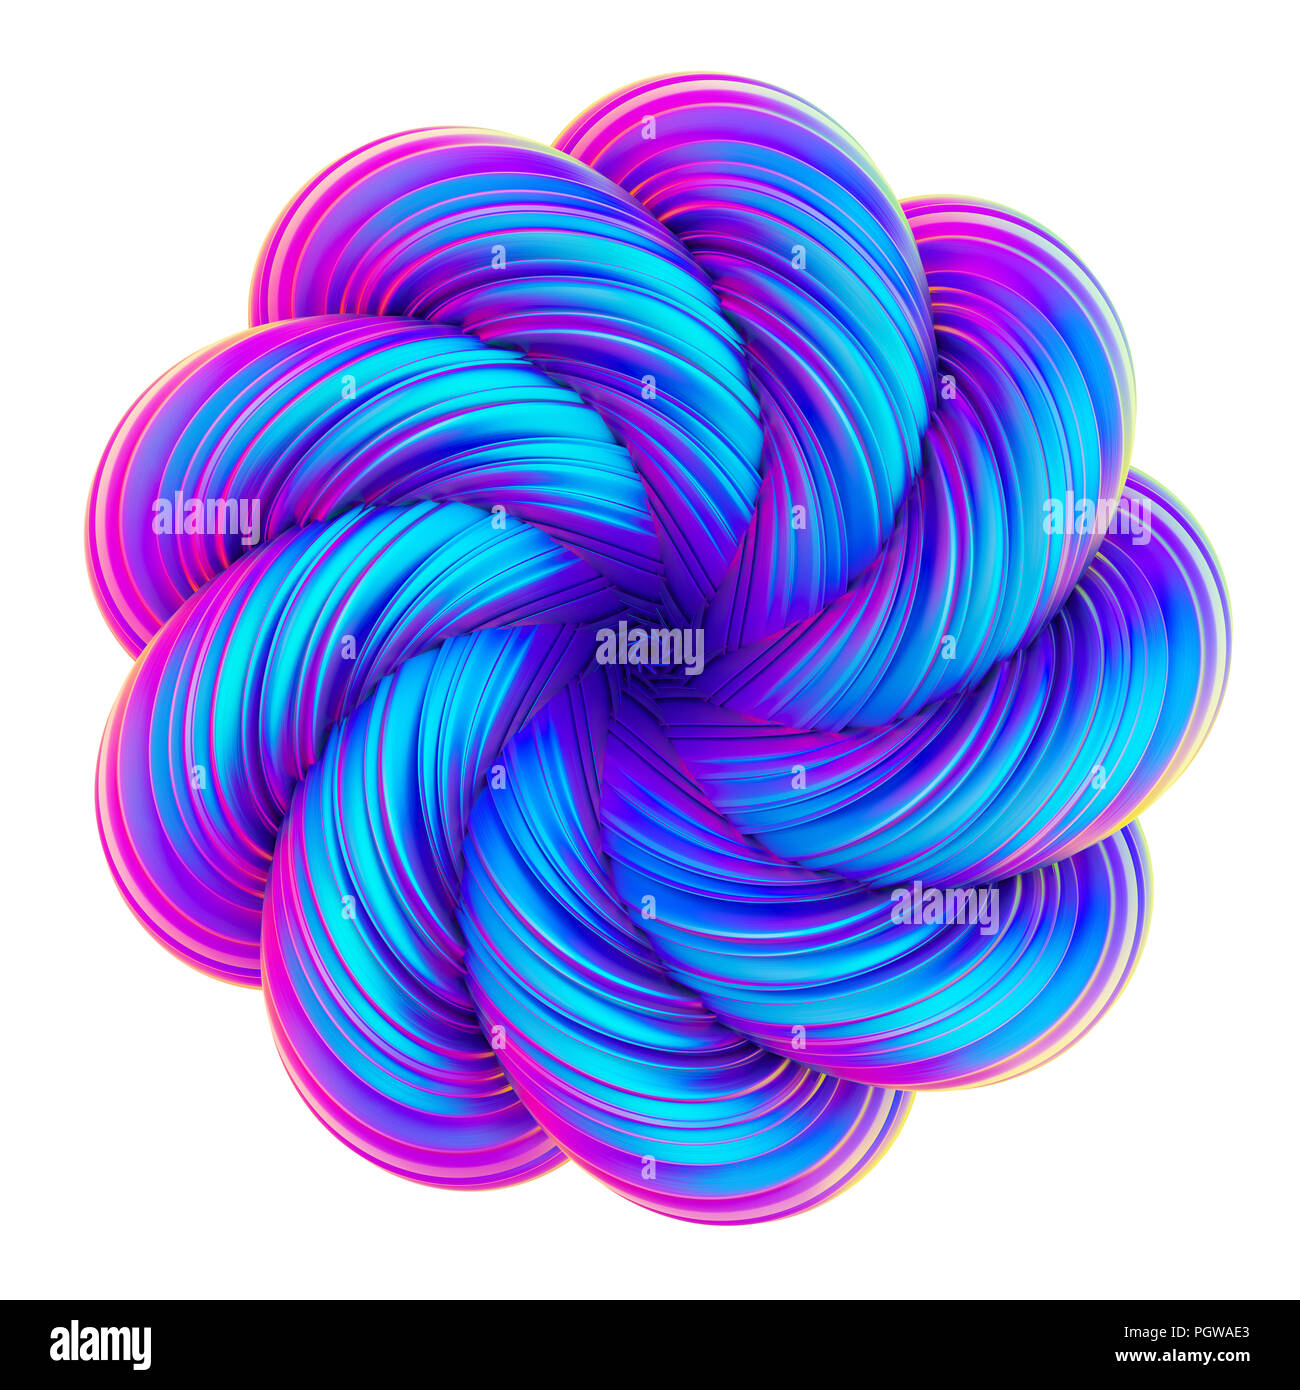 Fluid design holographic abstract twisted shape. Stock Photo